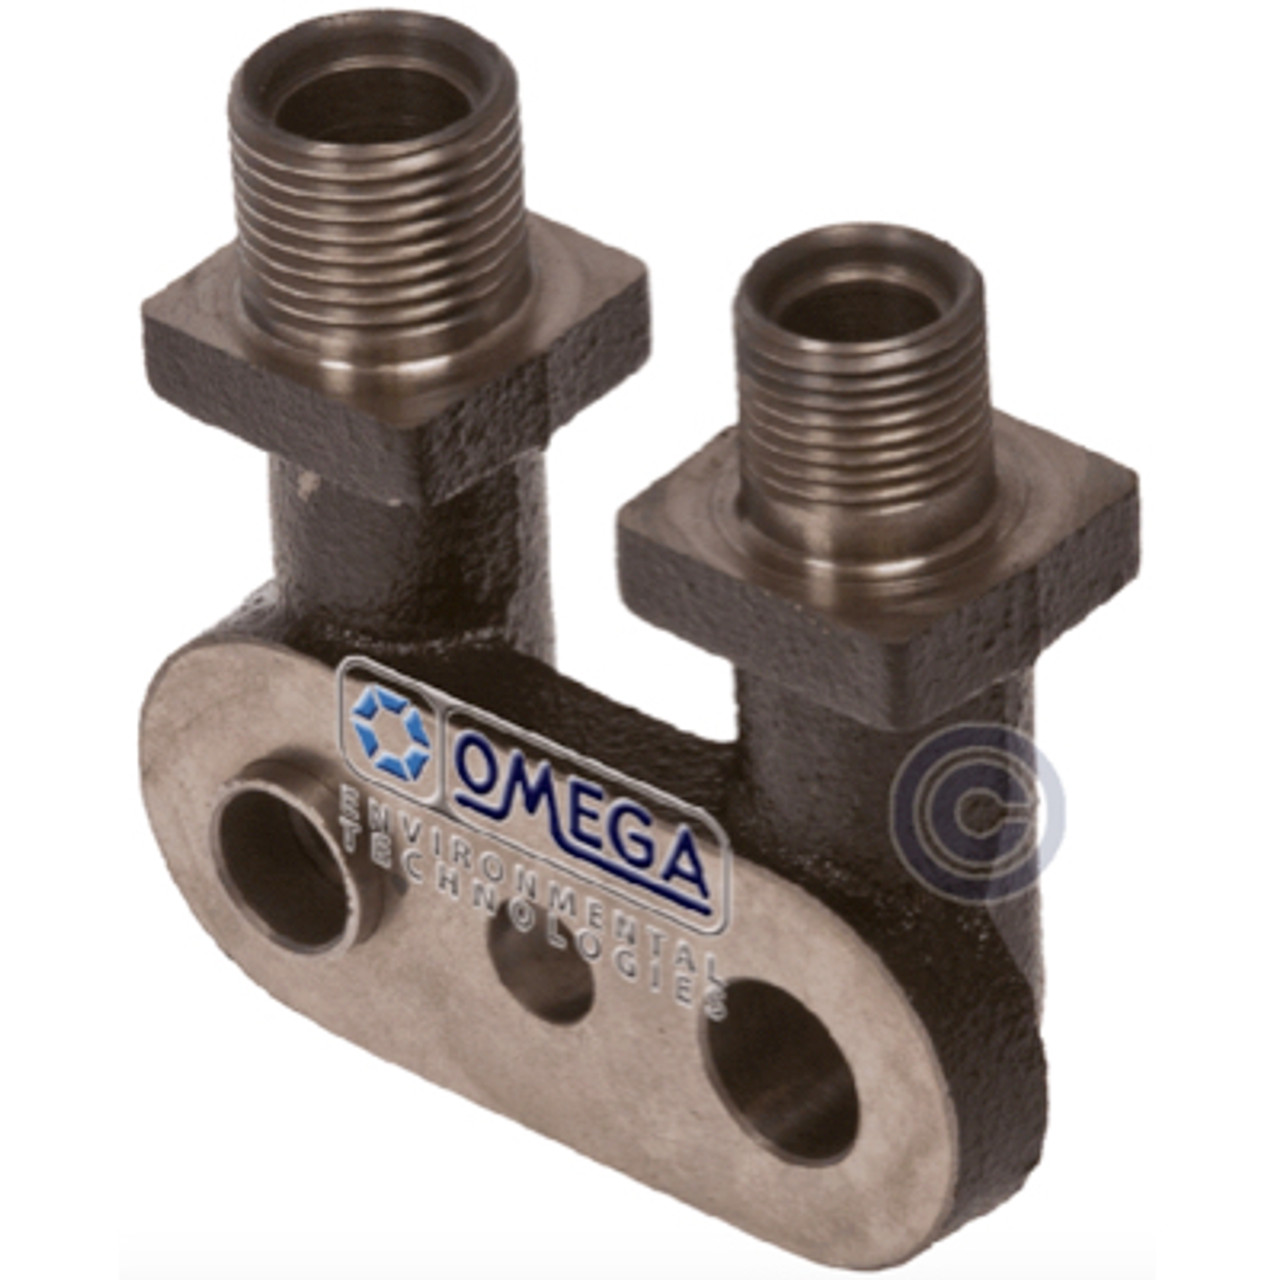 Seltec Compressor Bolt-On Fitting 3/4 in. x 7/8 in. O-Ring at 6:00 -  21-10198 by Omega